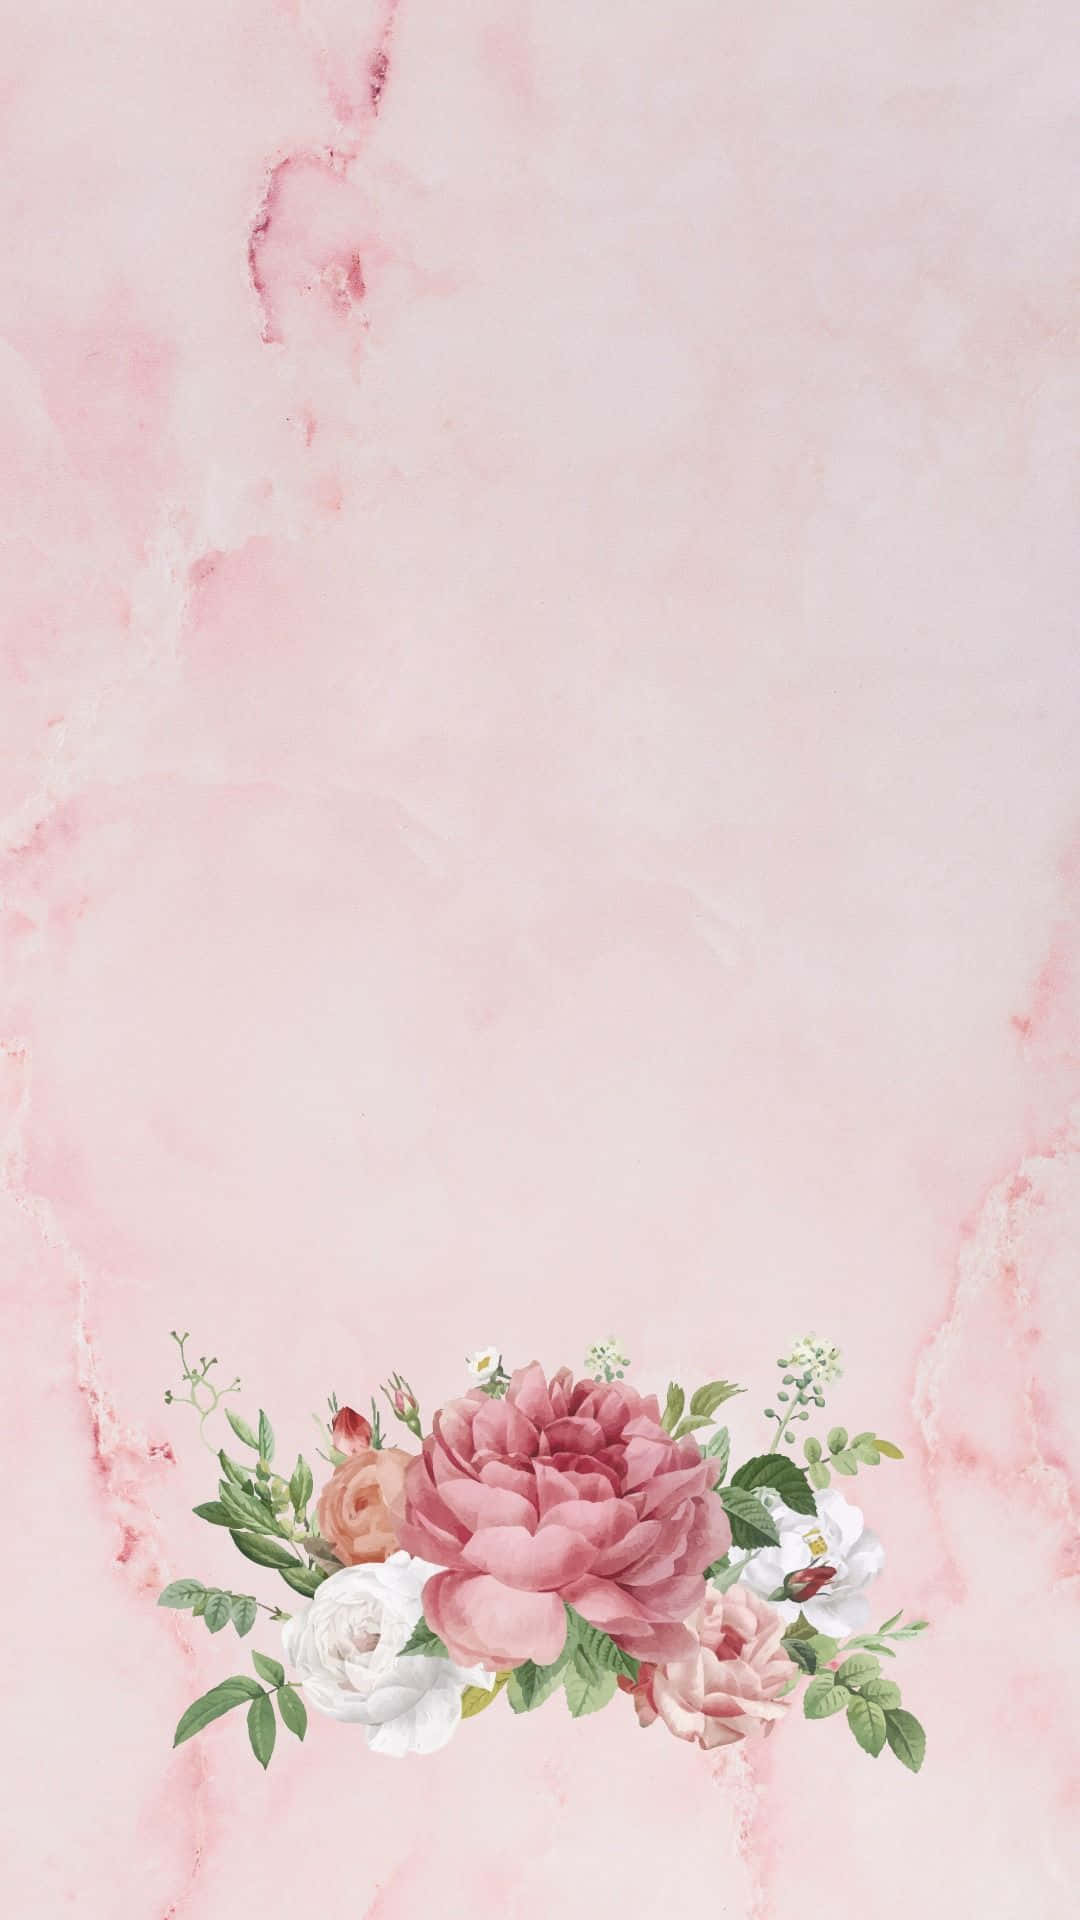 IPhone wallpaper with beautiful flowers on a pink marble background - Balance